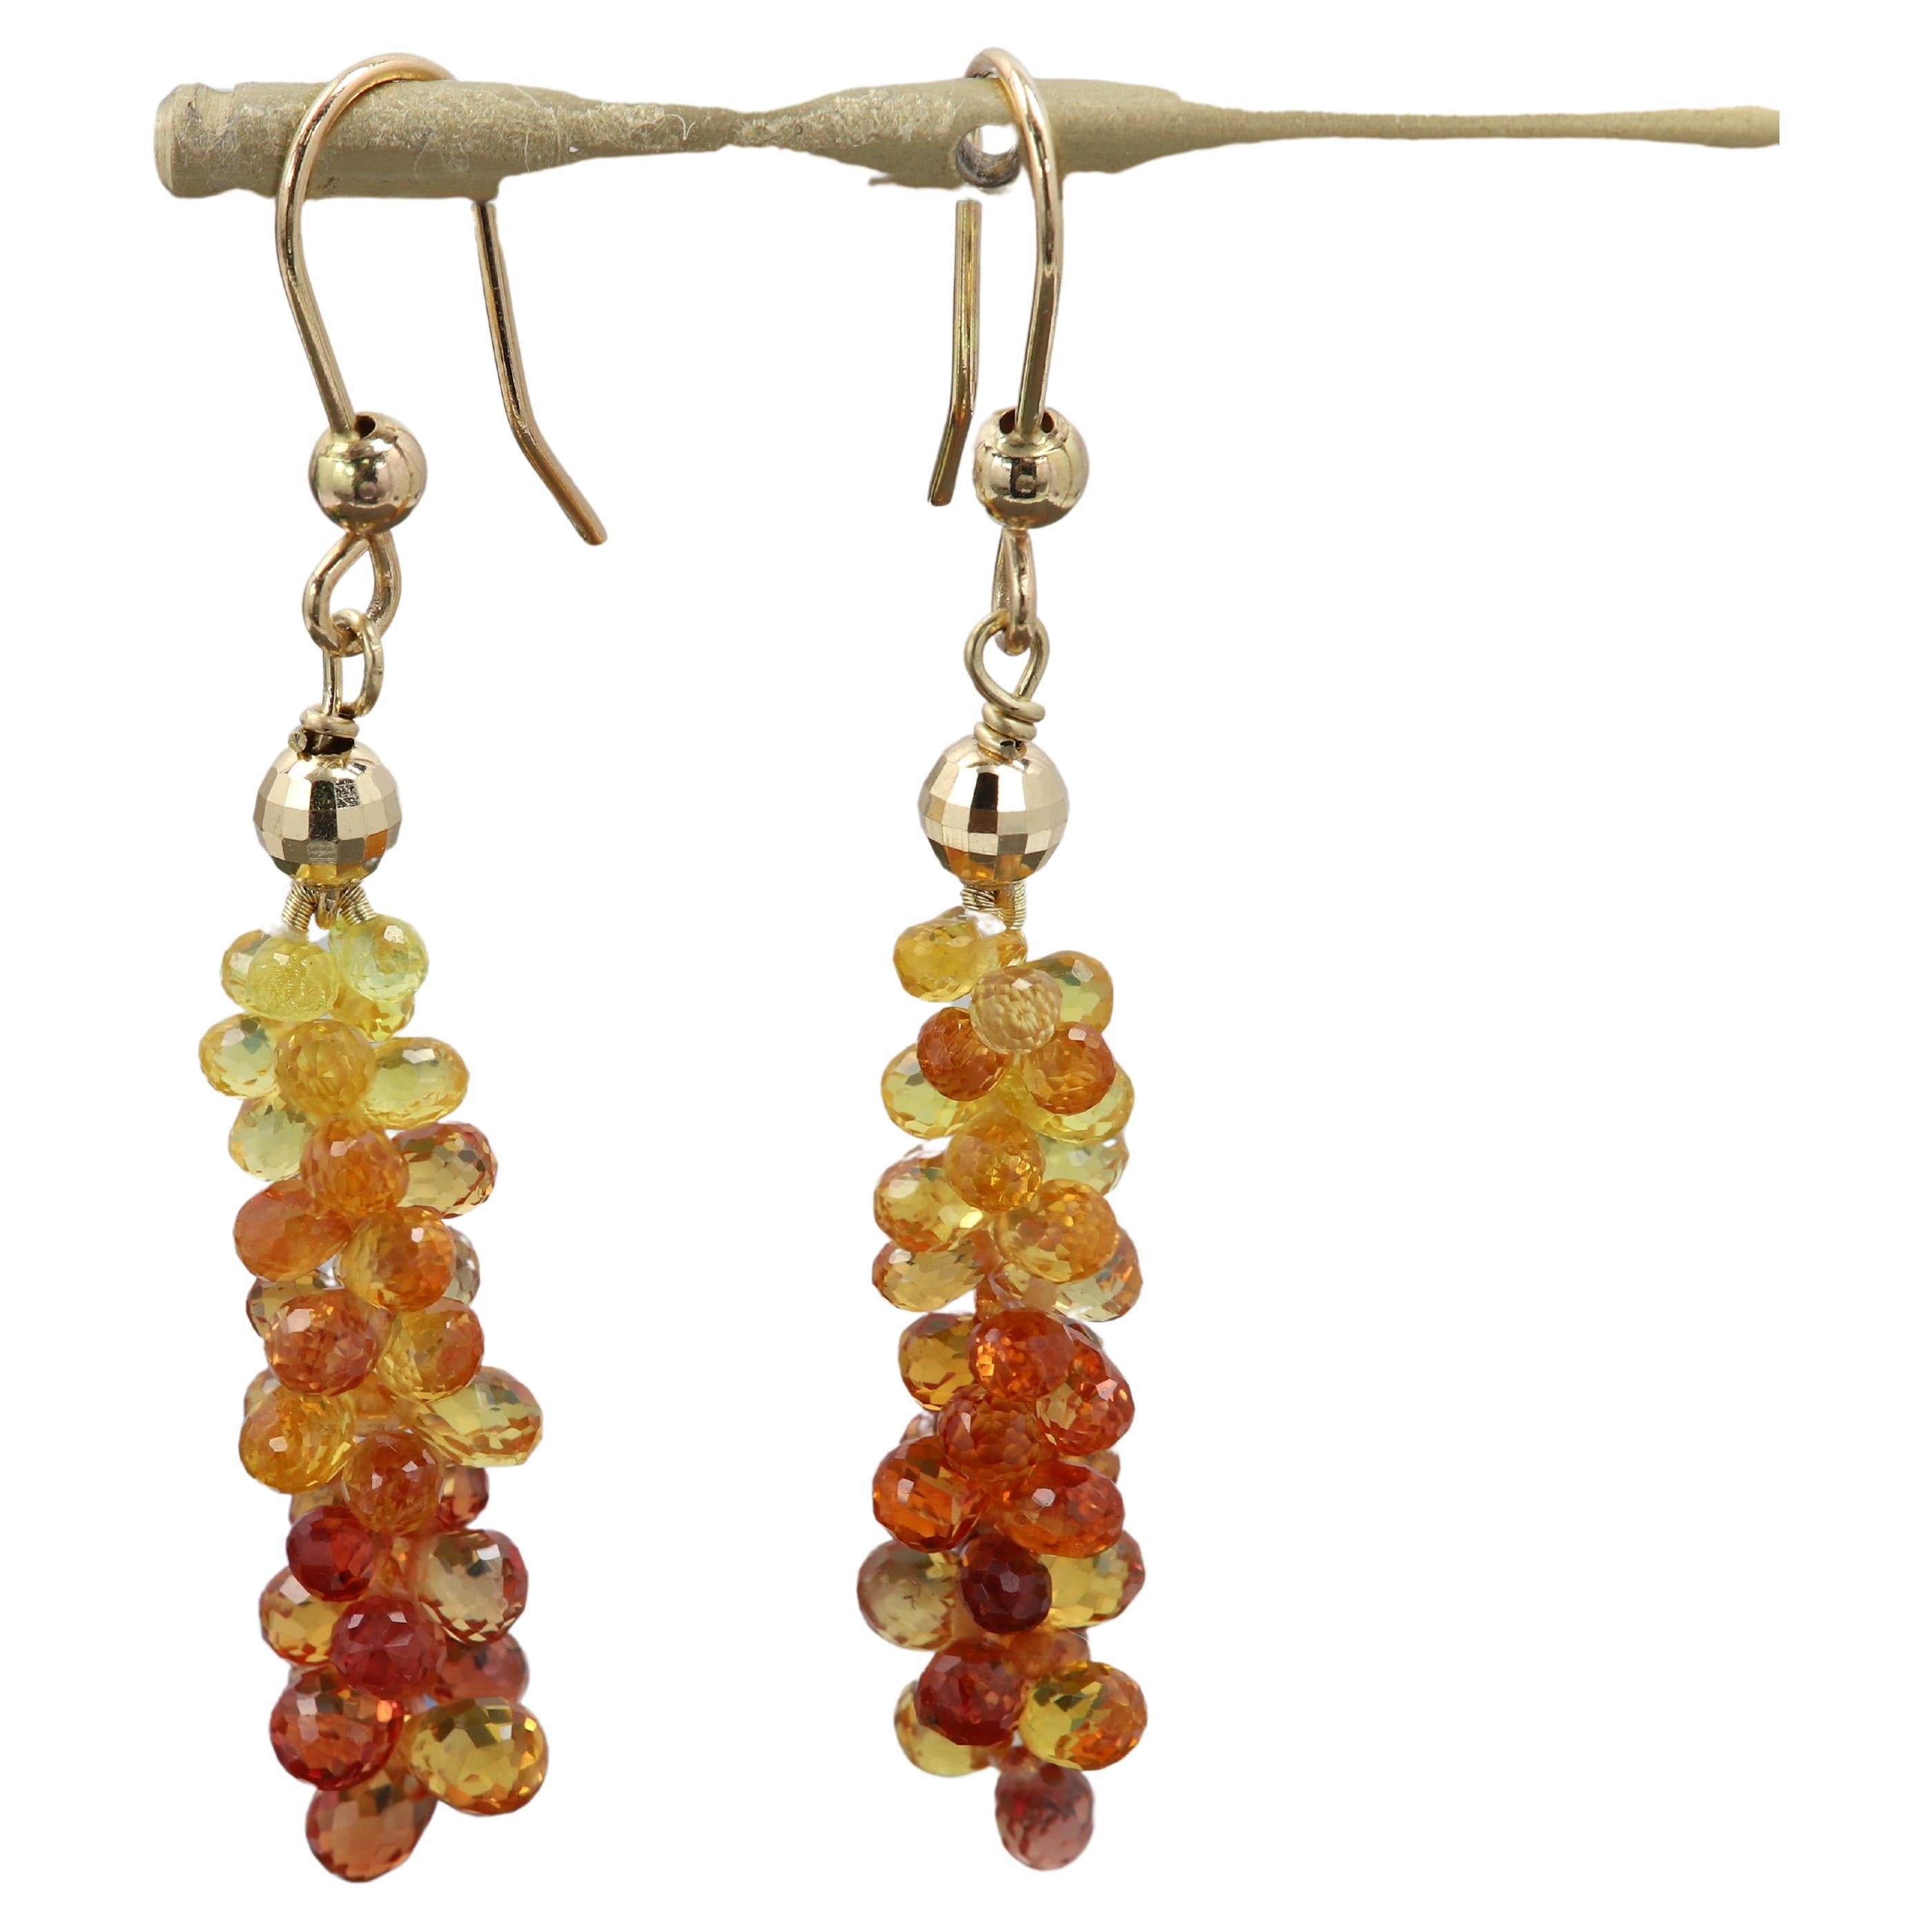 Made in USA
Unique Tear Drop/Briolette Sapphire Earrings
Naturals Gemstones
Orange and Yellow 
Trendy and fashionable look.
weight is approx 4.0 grams total.
Real 14k Yellow Gold - hook wire and balls.
Approx total size: 2' Inch long 
Sapphire drops